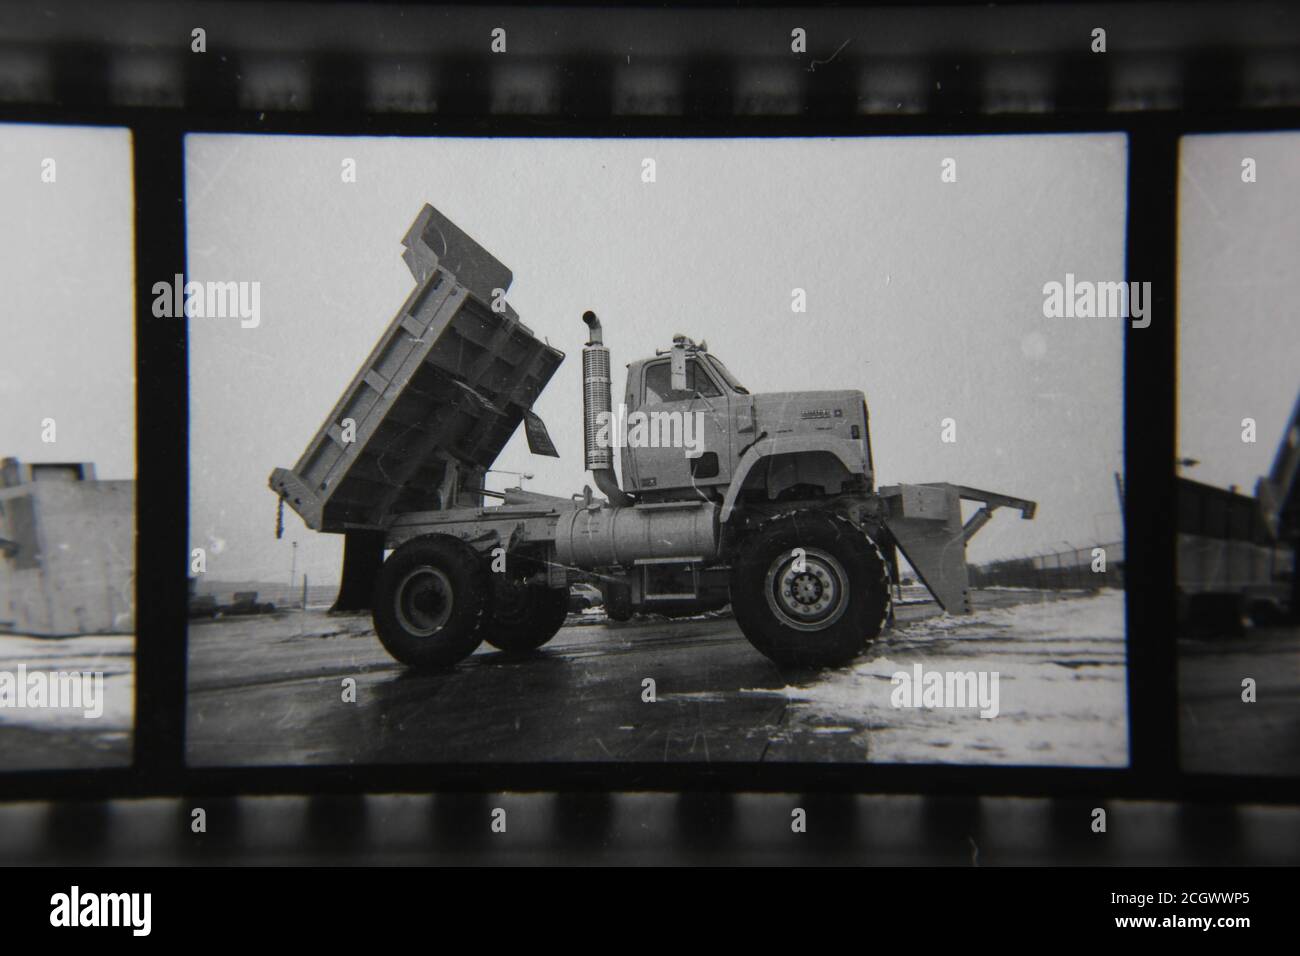 Fine 70s Vintage Black And White Photography Of Big Trucks And Road Construction Equipment Stock Photo Alamy